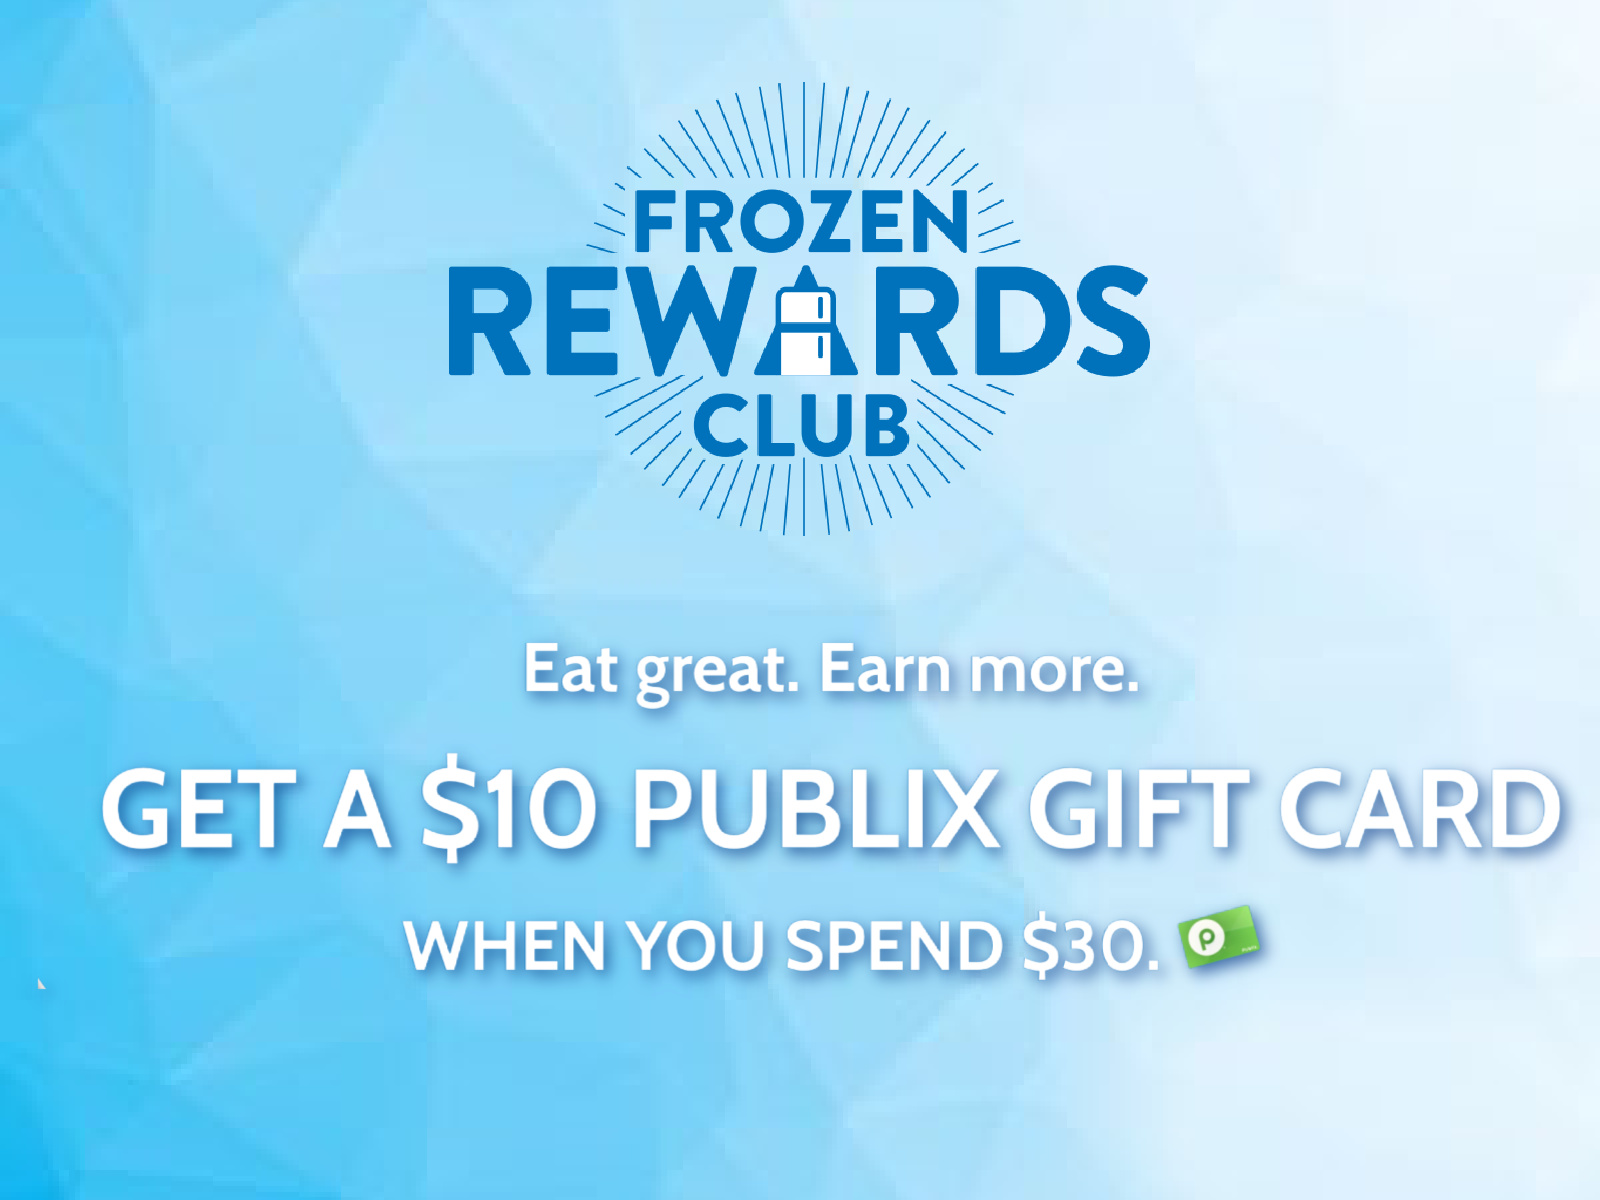 The Frozen Rewards Club Is Back For 2022 – Start Earning Up To $50 In Publix Gift Cards!